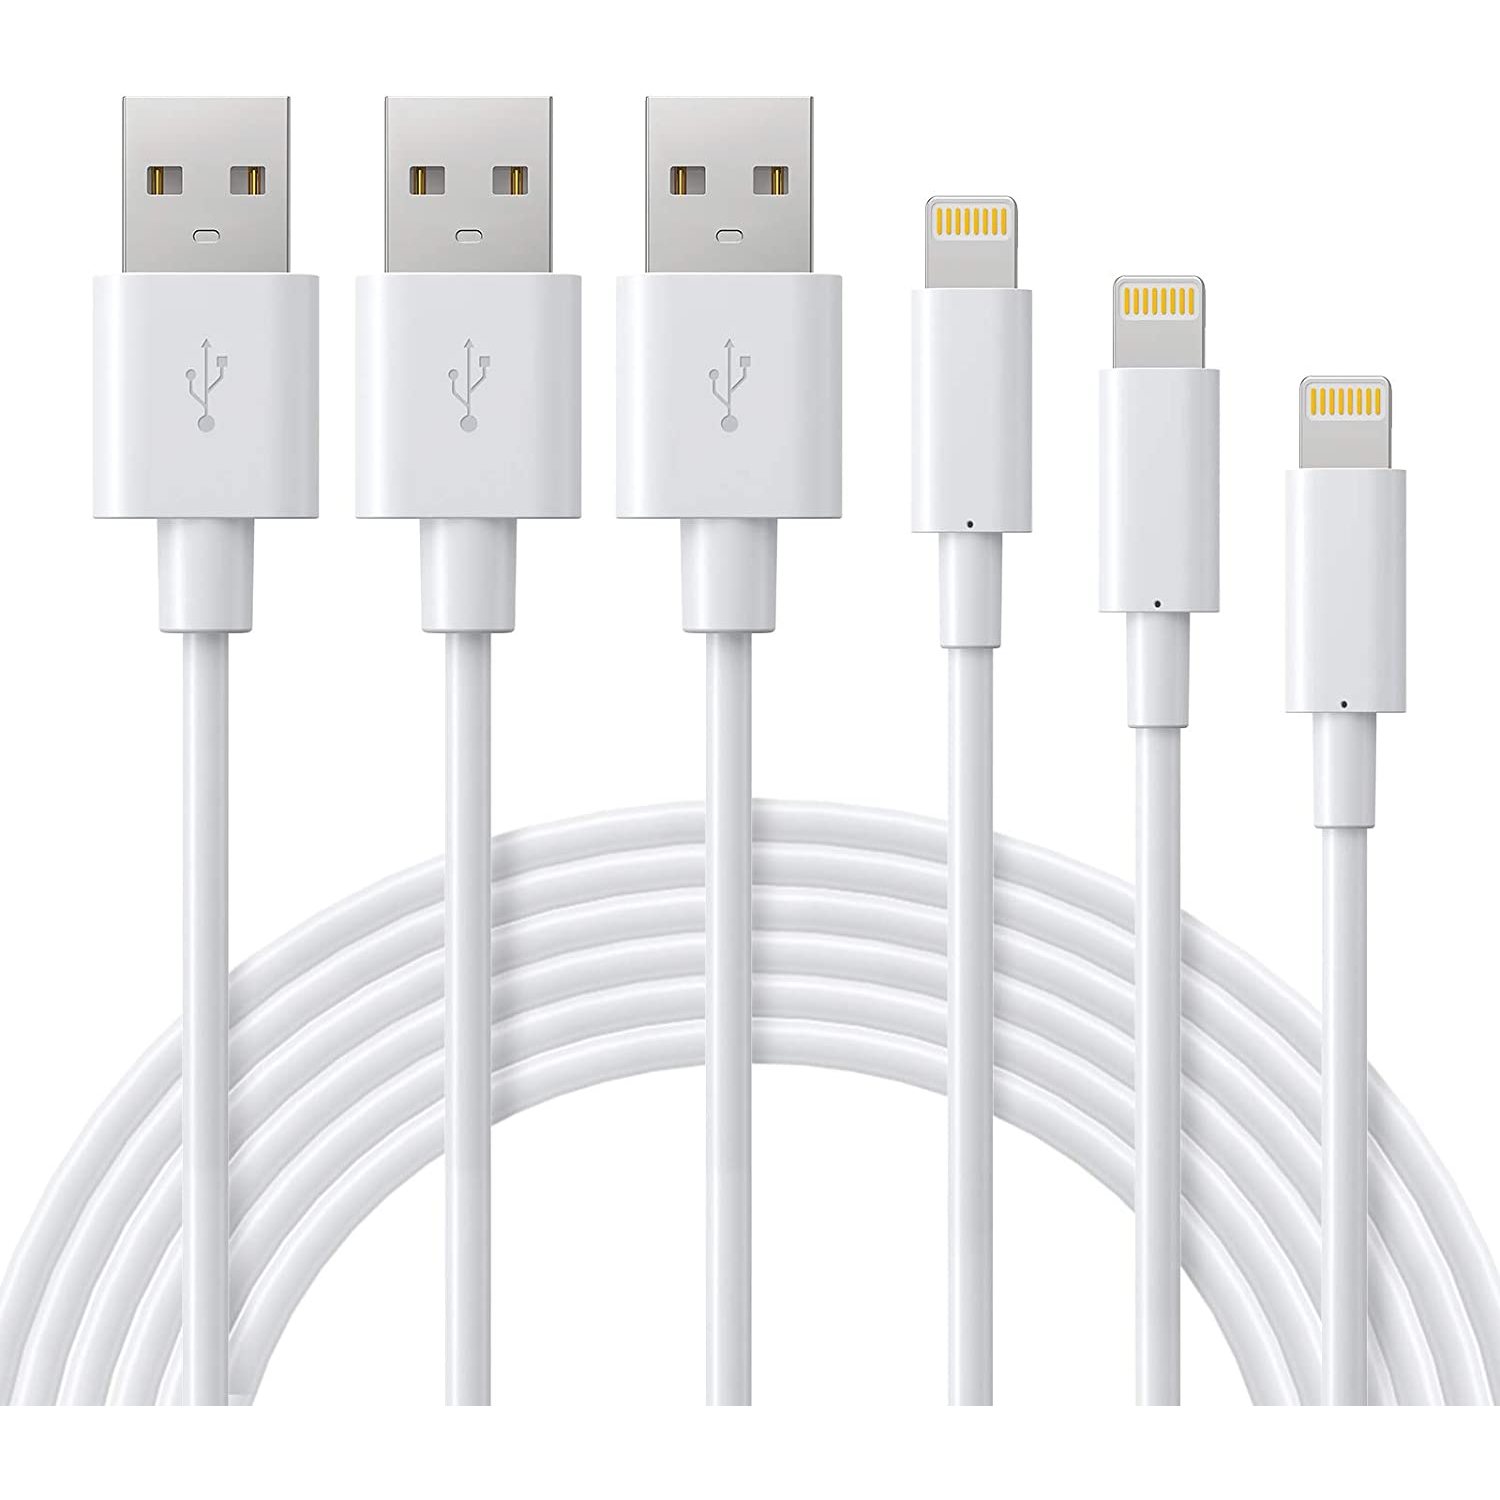 (3PK)[Apple MFi Certified] iPhone/iPad Charging/Charger Cord Lightening to USB Cable Fast Charging and Syncing for iPads,iPods and iPhone X/8/7/6s/6/plus/5s/5c/SE (FREE SHIPPING)